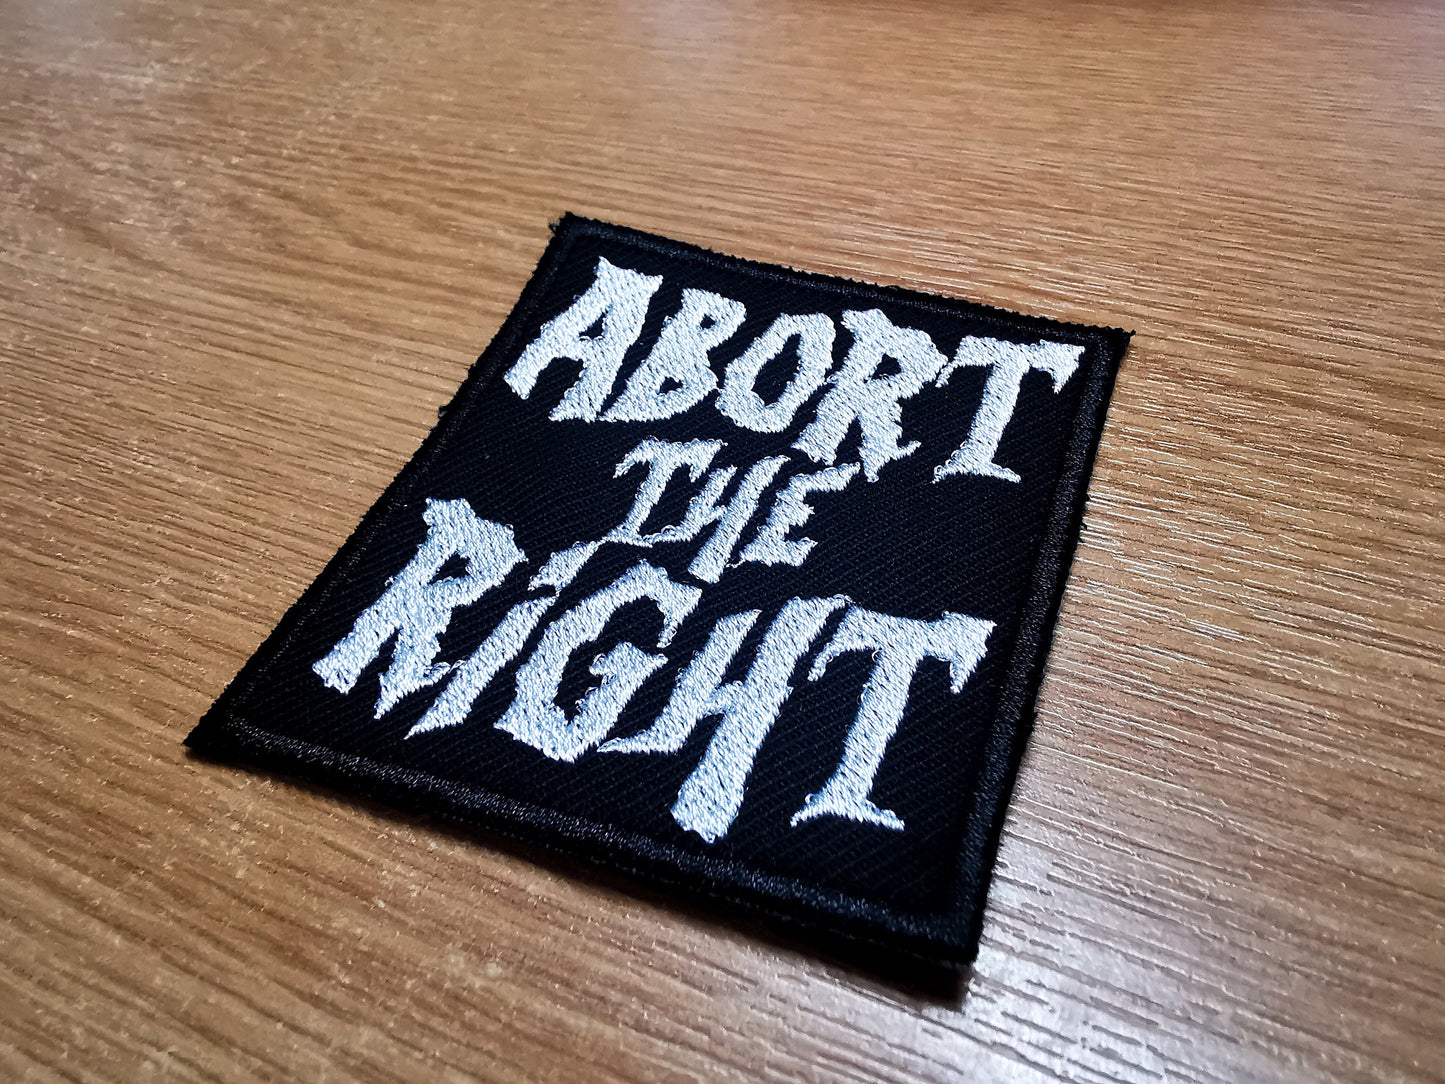 Abort The Right Pro Choice Feminist Embroidered Iron On Patch Collection Abortion Politics Punk